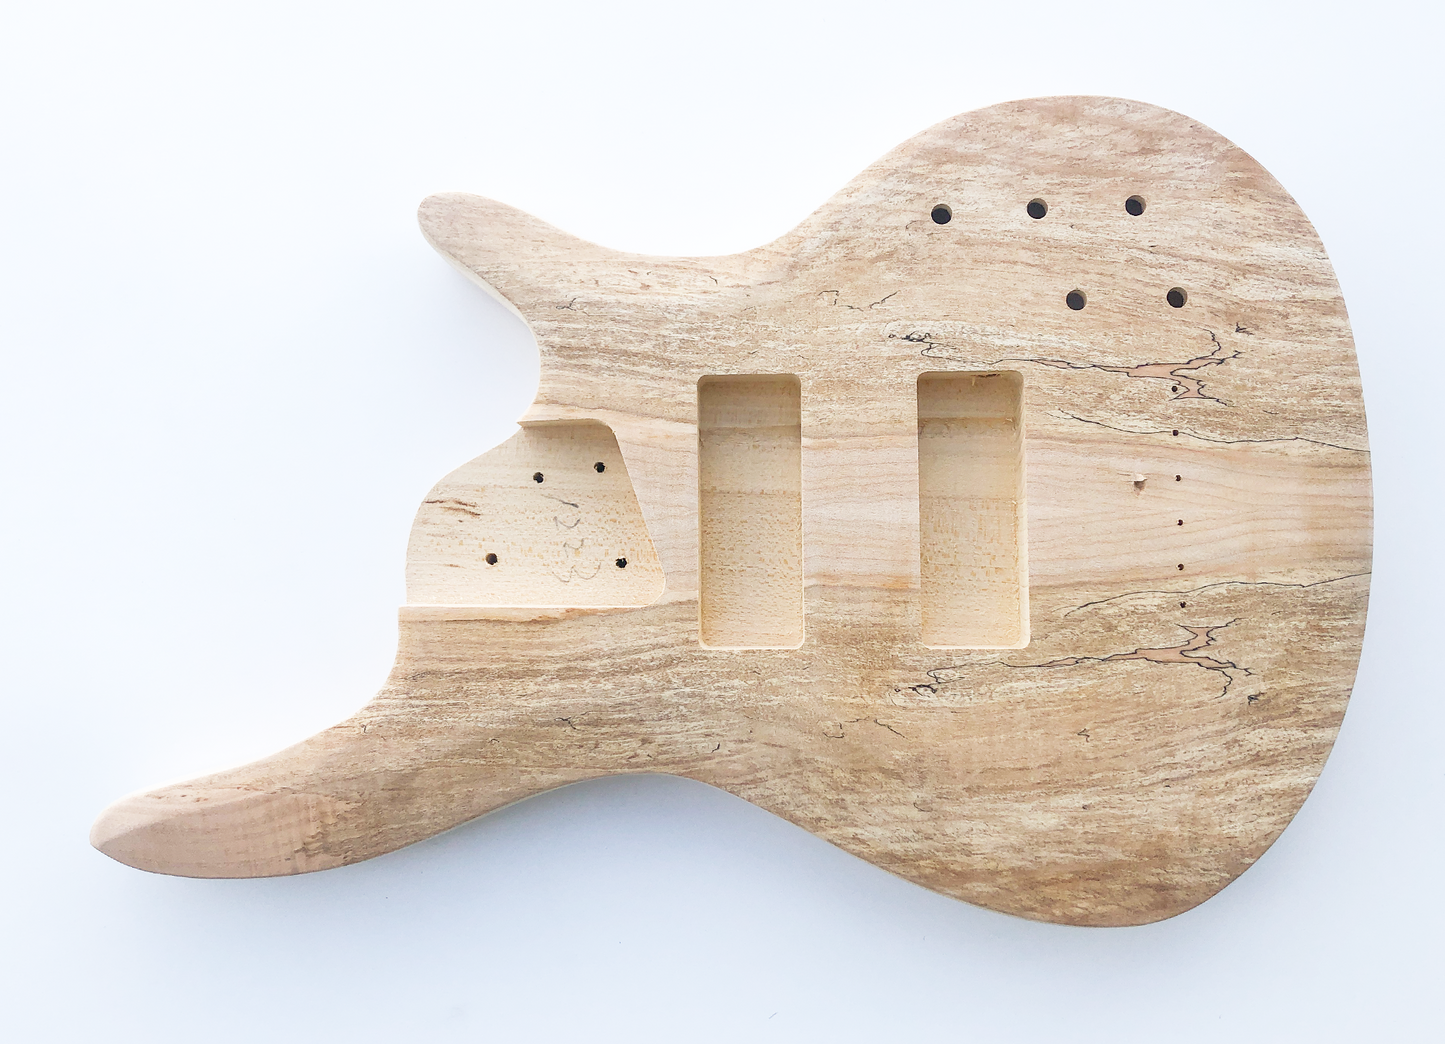 5 String Style Spalted Maple Build Your Own Bass Guitar Kit